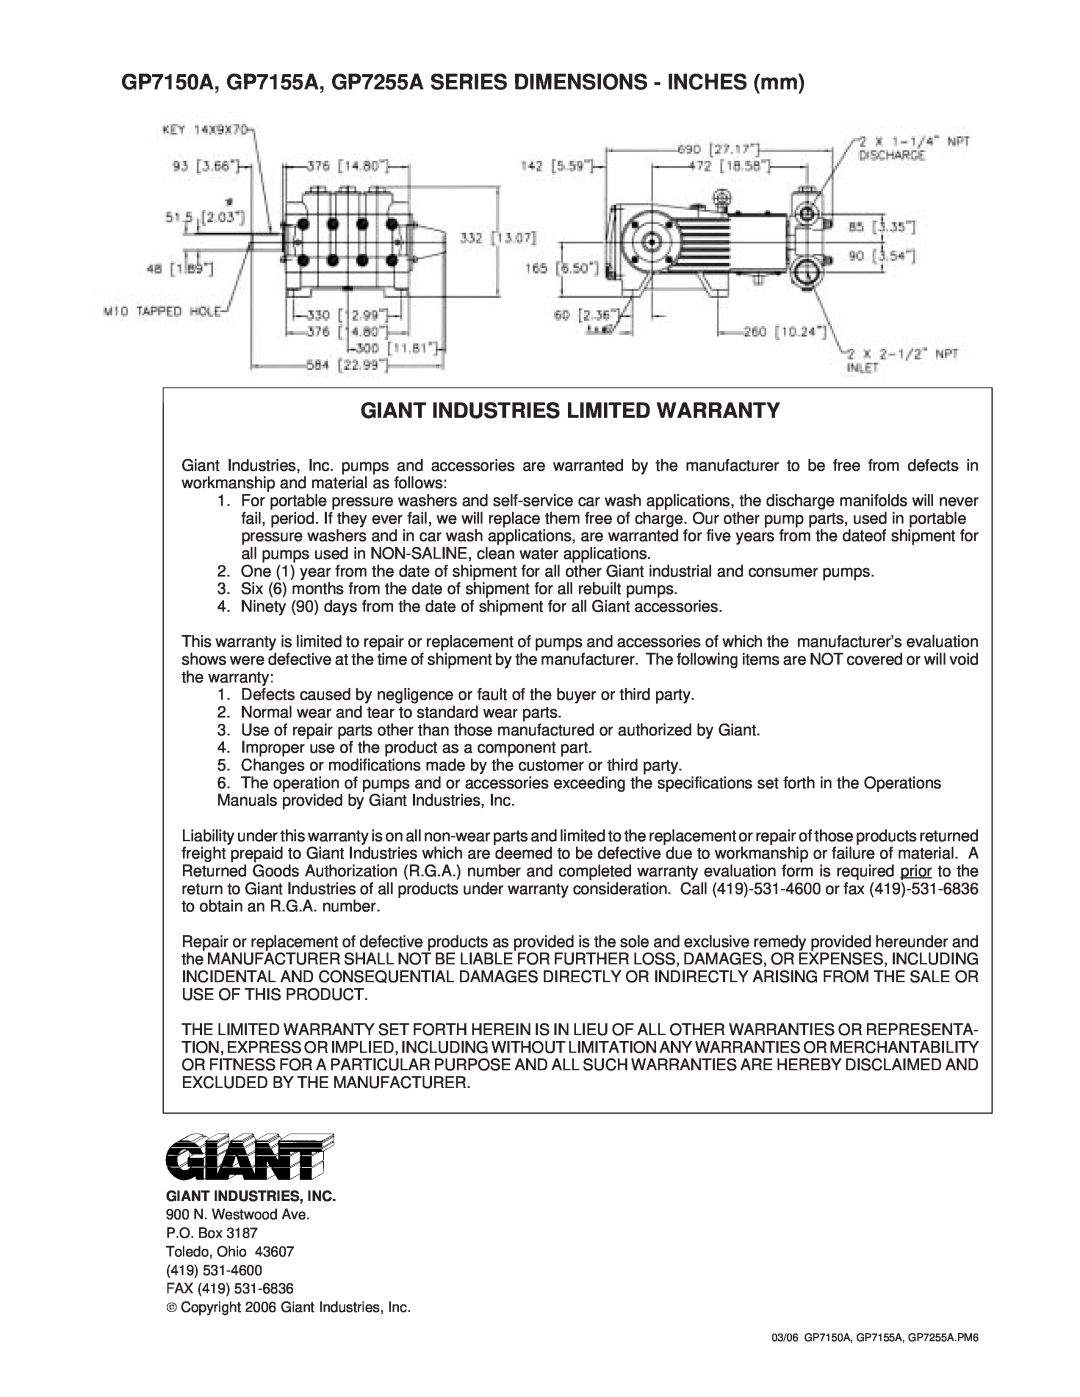 Giant GP7150A, GP7155A, GP7255A SERIES DIMENSIONS - INCHES mm, Giant Industries Limited Warranty 